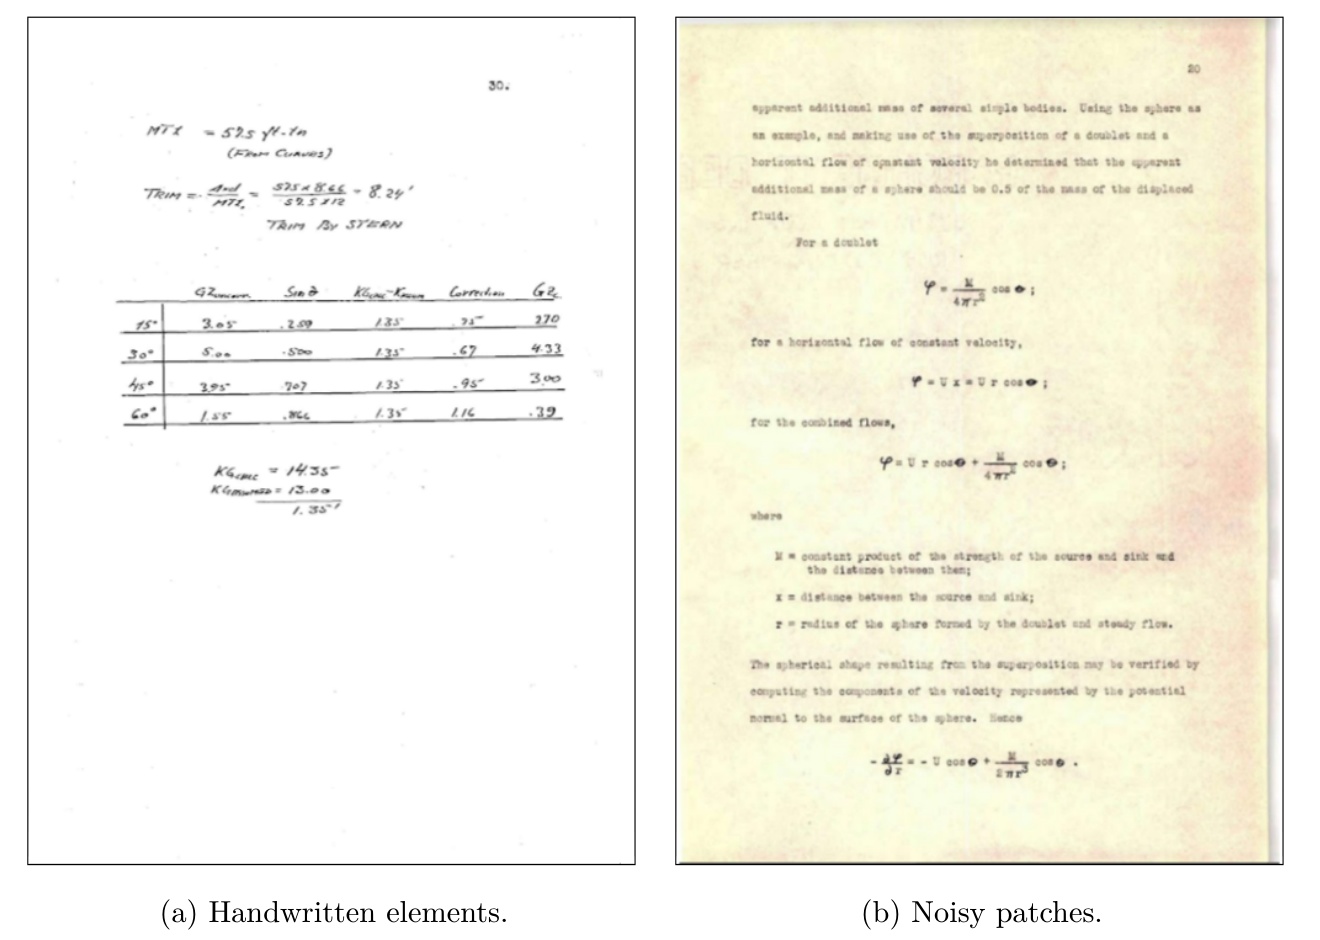 Figure 5.1: Examples of pages from scanned documents.